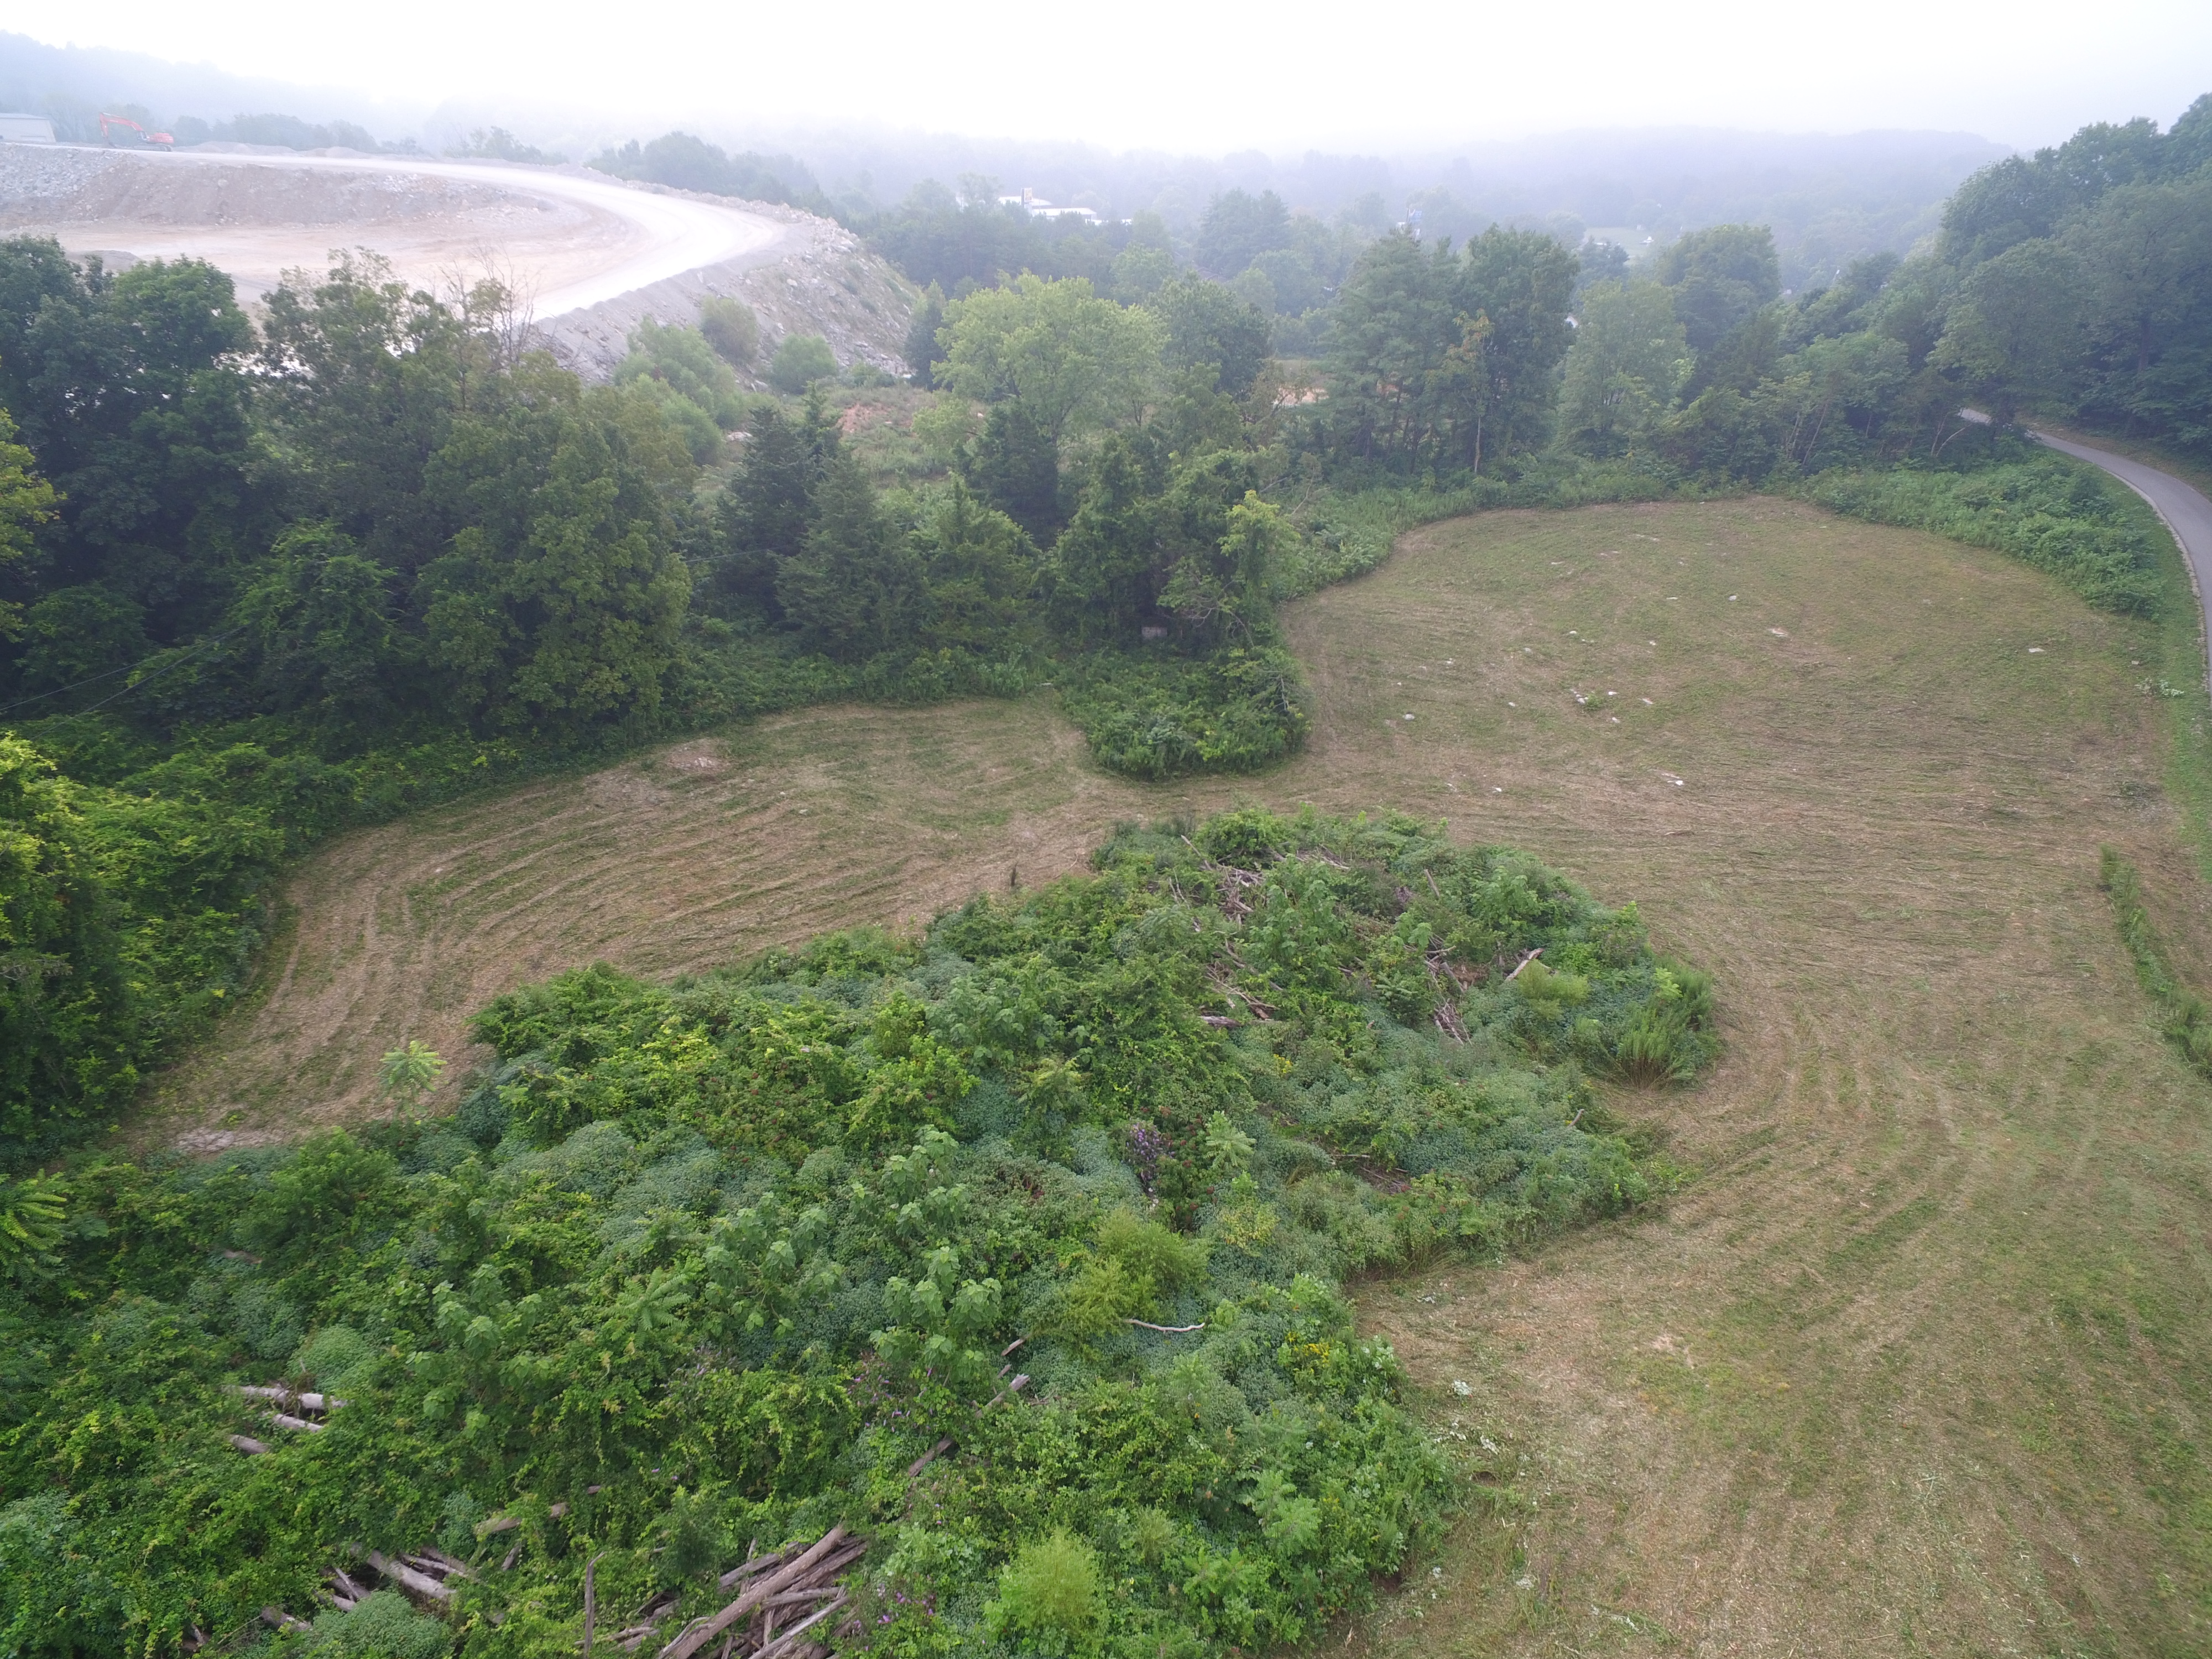 Adopt Me Lane, 4-acres available in Somerset, Kentucky